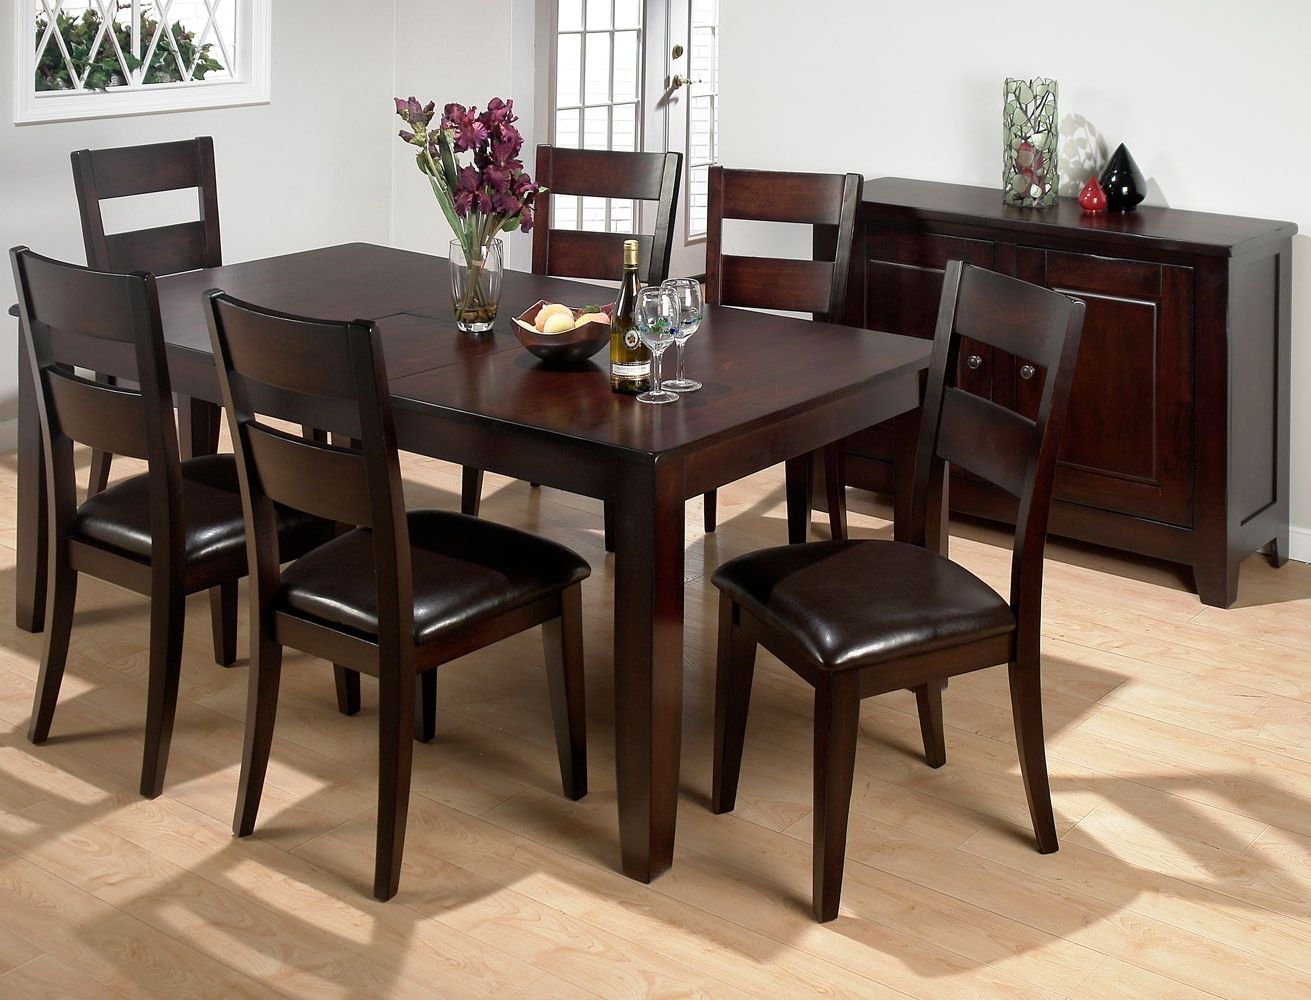 2017 Dark Wood Dining Tables And 6 Chairs Throughout Luxury Wooden Dining Room Table With 6 Chairs – Dining Room Design  (View 22 of 25)